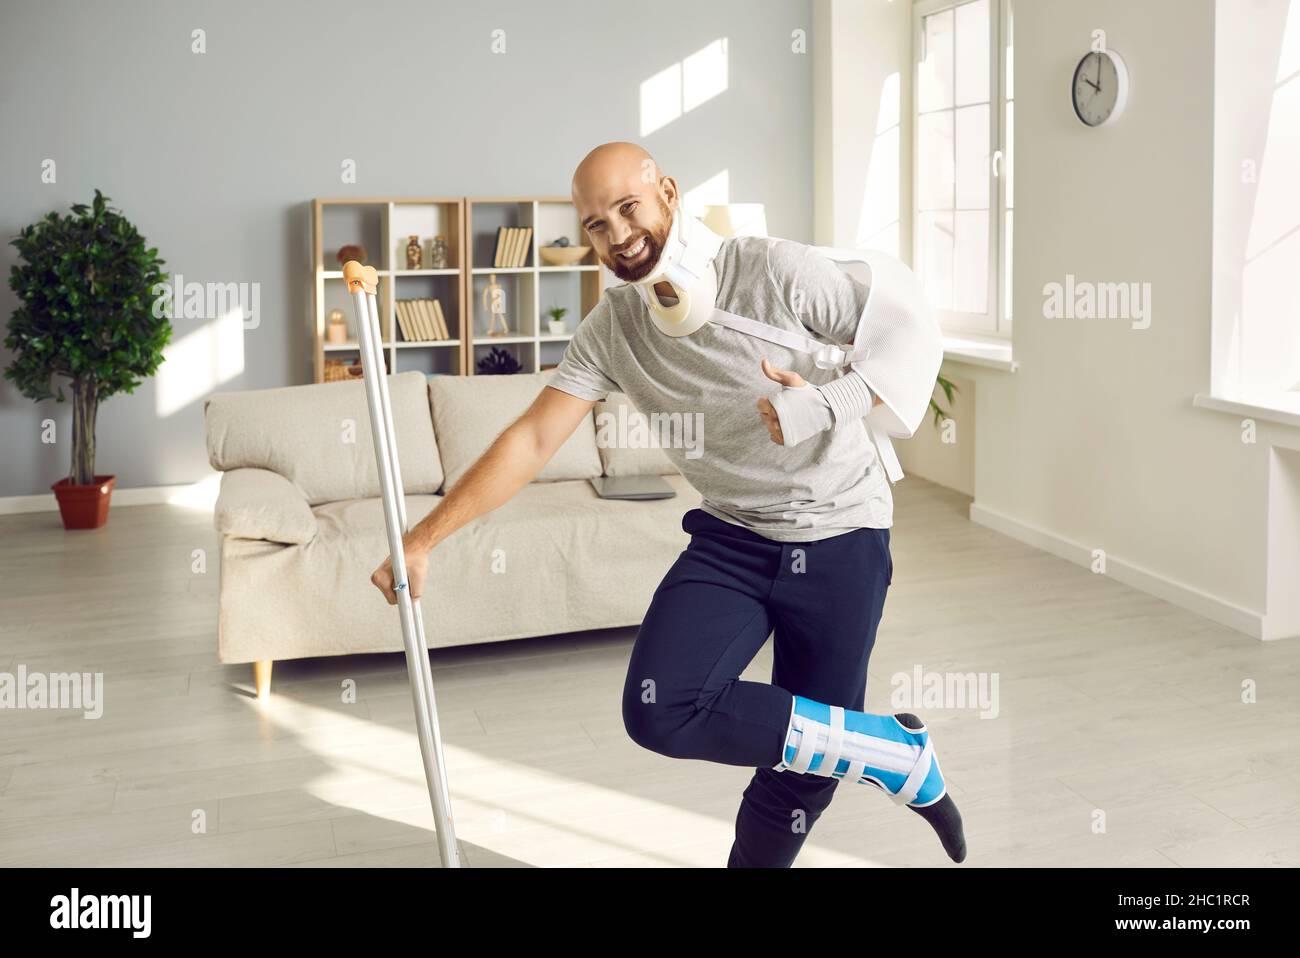 Happy man on sick leave due to injuries leaning on crutch, smiling and showing thumbs-up Stock Photo